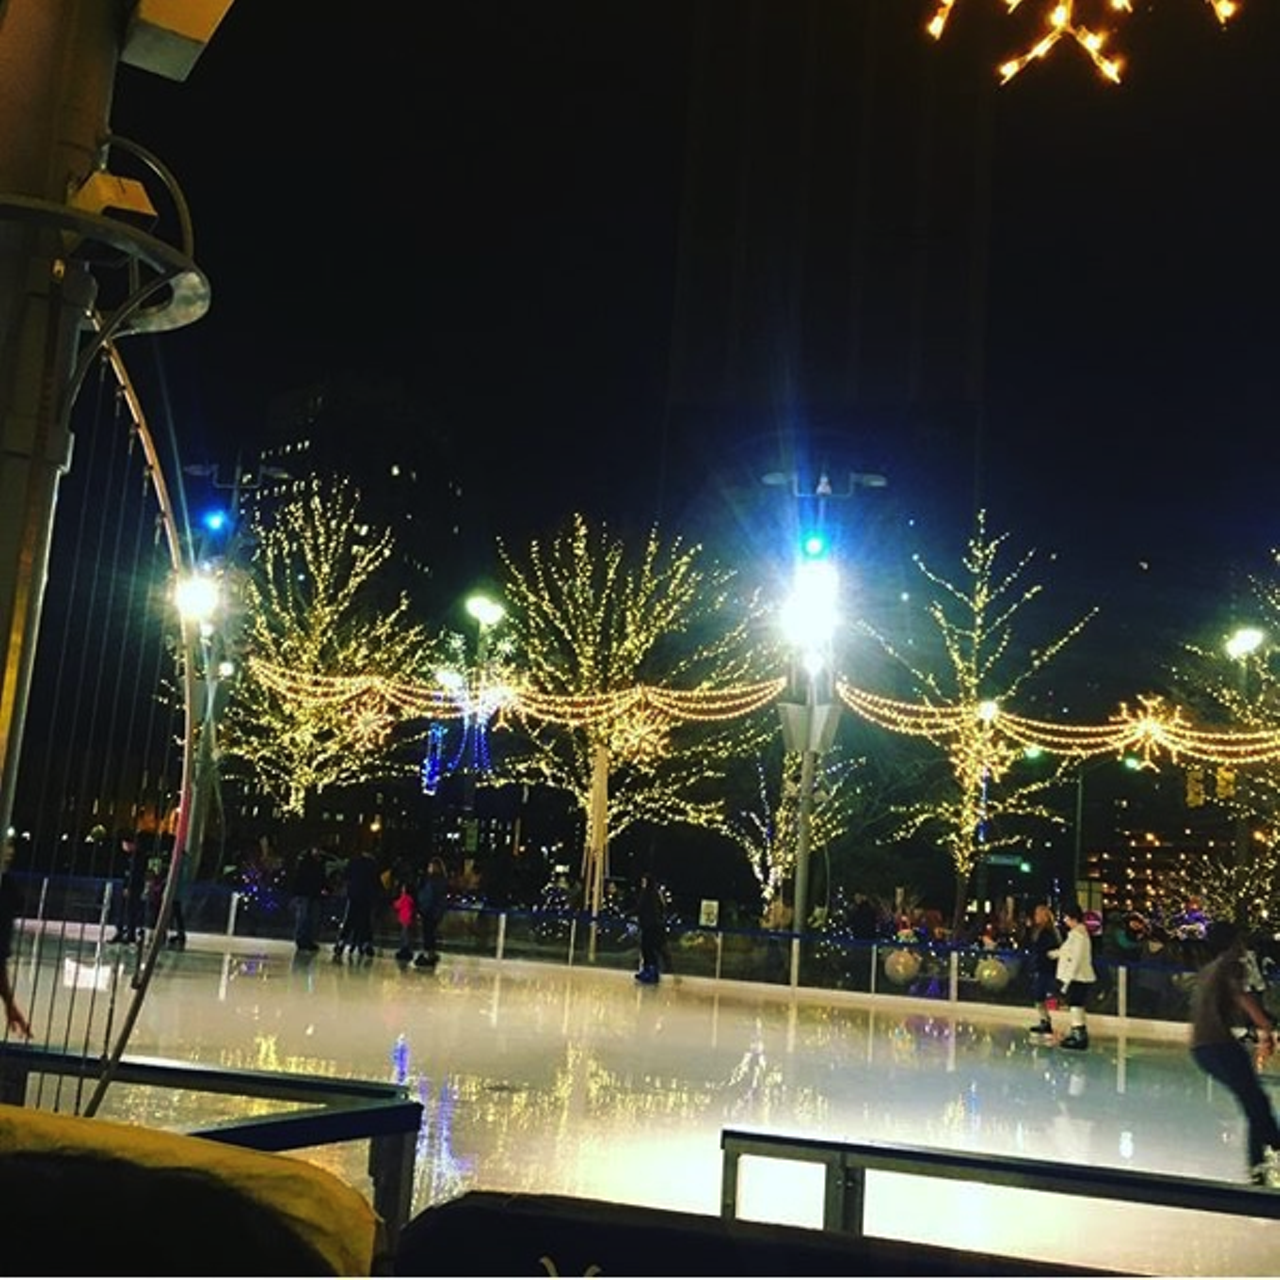 Ice skating rink @ Campus Martius Park &#149; Why walk when you can glide around a giant ice skating rink right in the heart of Detroit? Tie up your ice skates, or rent them for $3, and live out your inner Winter Olympian dreams now until Sunday, 3/6. Not a skater? Walk around Campus Martius and enjoy some of the many businesses open around the park. Ice skating rink hours vary throughout the week; 800 Woodward Ave., Detroit: campusmartiuspark.org: adult rink admission, $8; kids 12 and under rink admission, $7. (Photo via Instagram user ngianhormua)